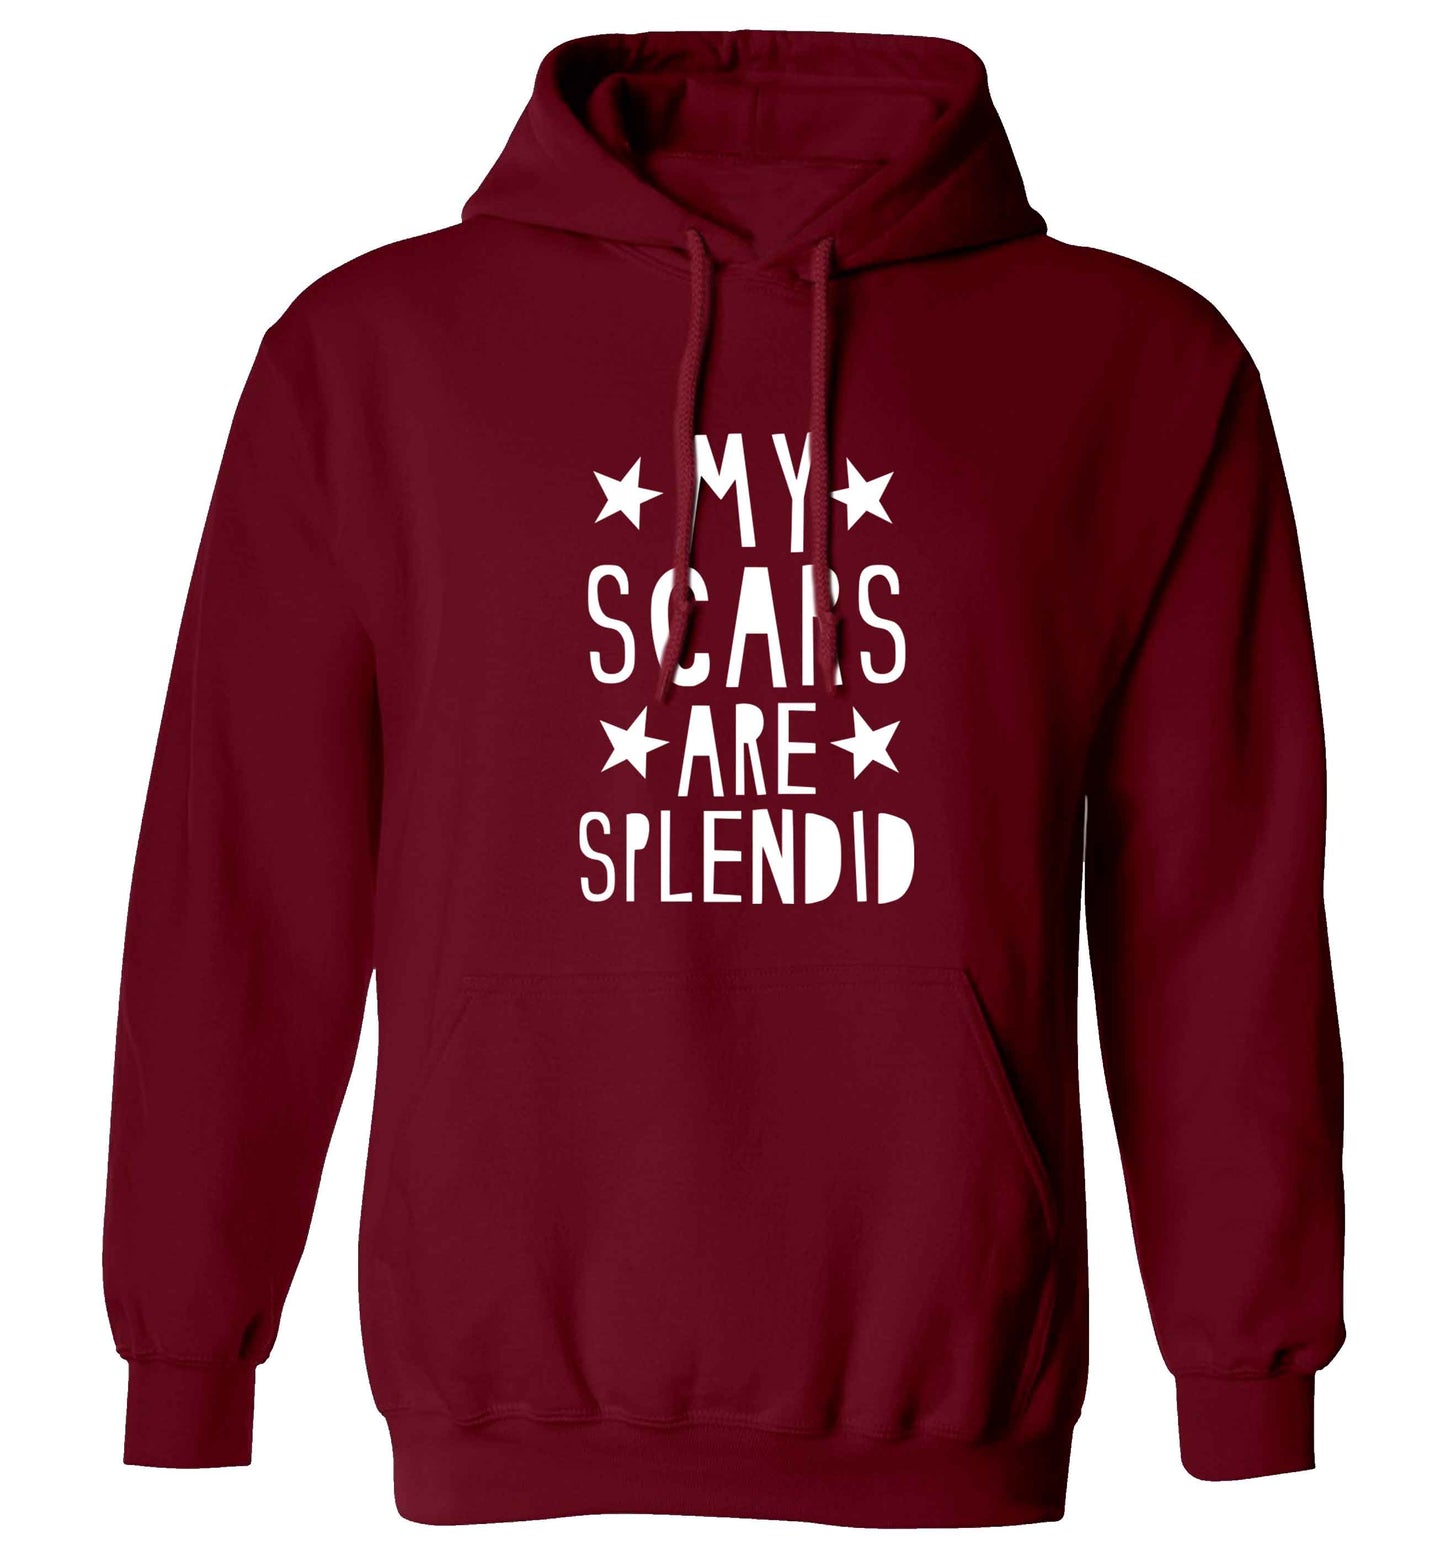 My scars are beautiful adults unisex maroon hoodie 2XL